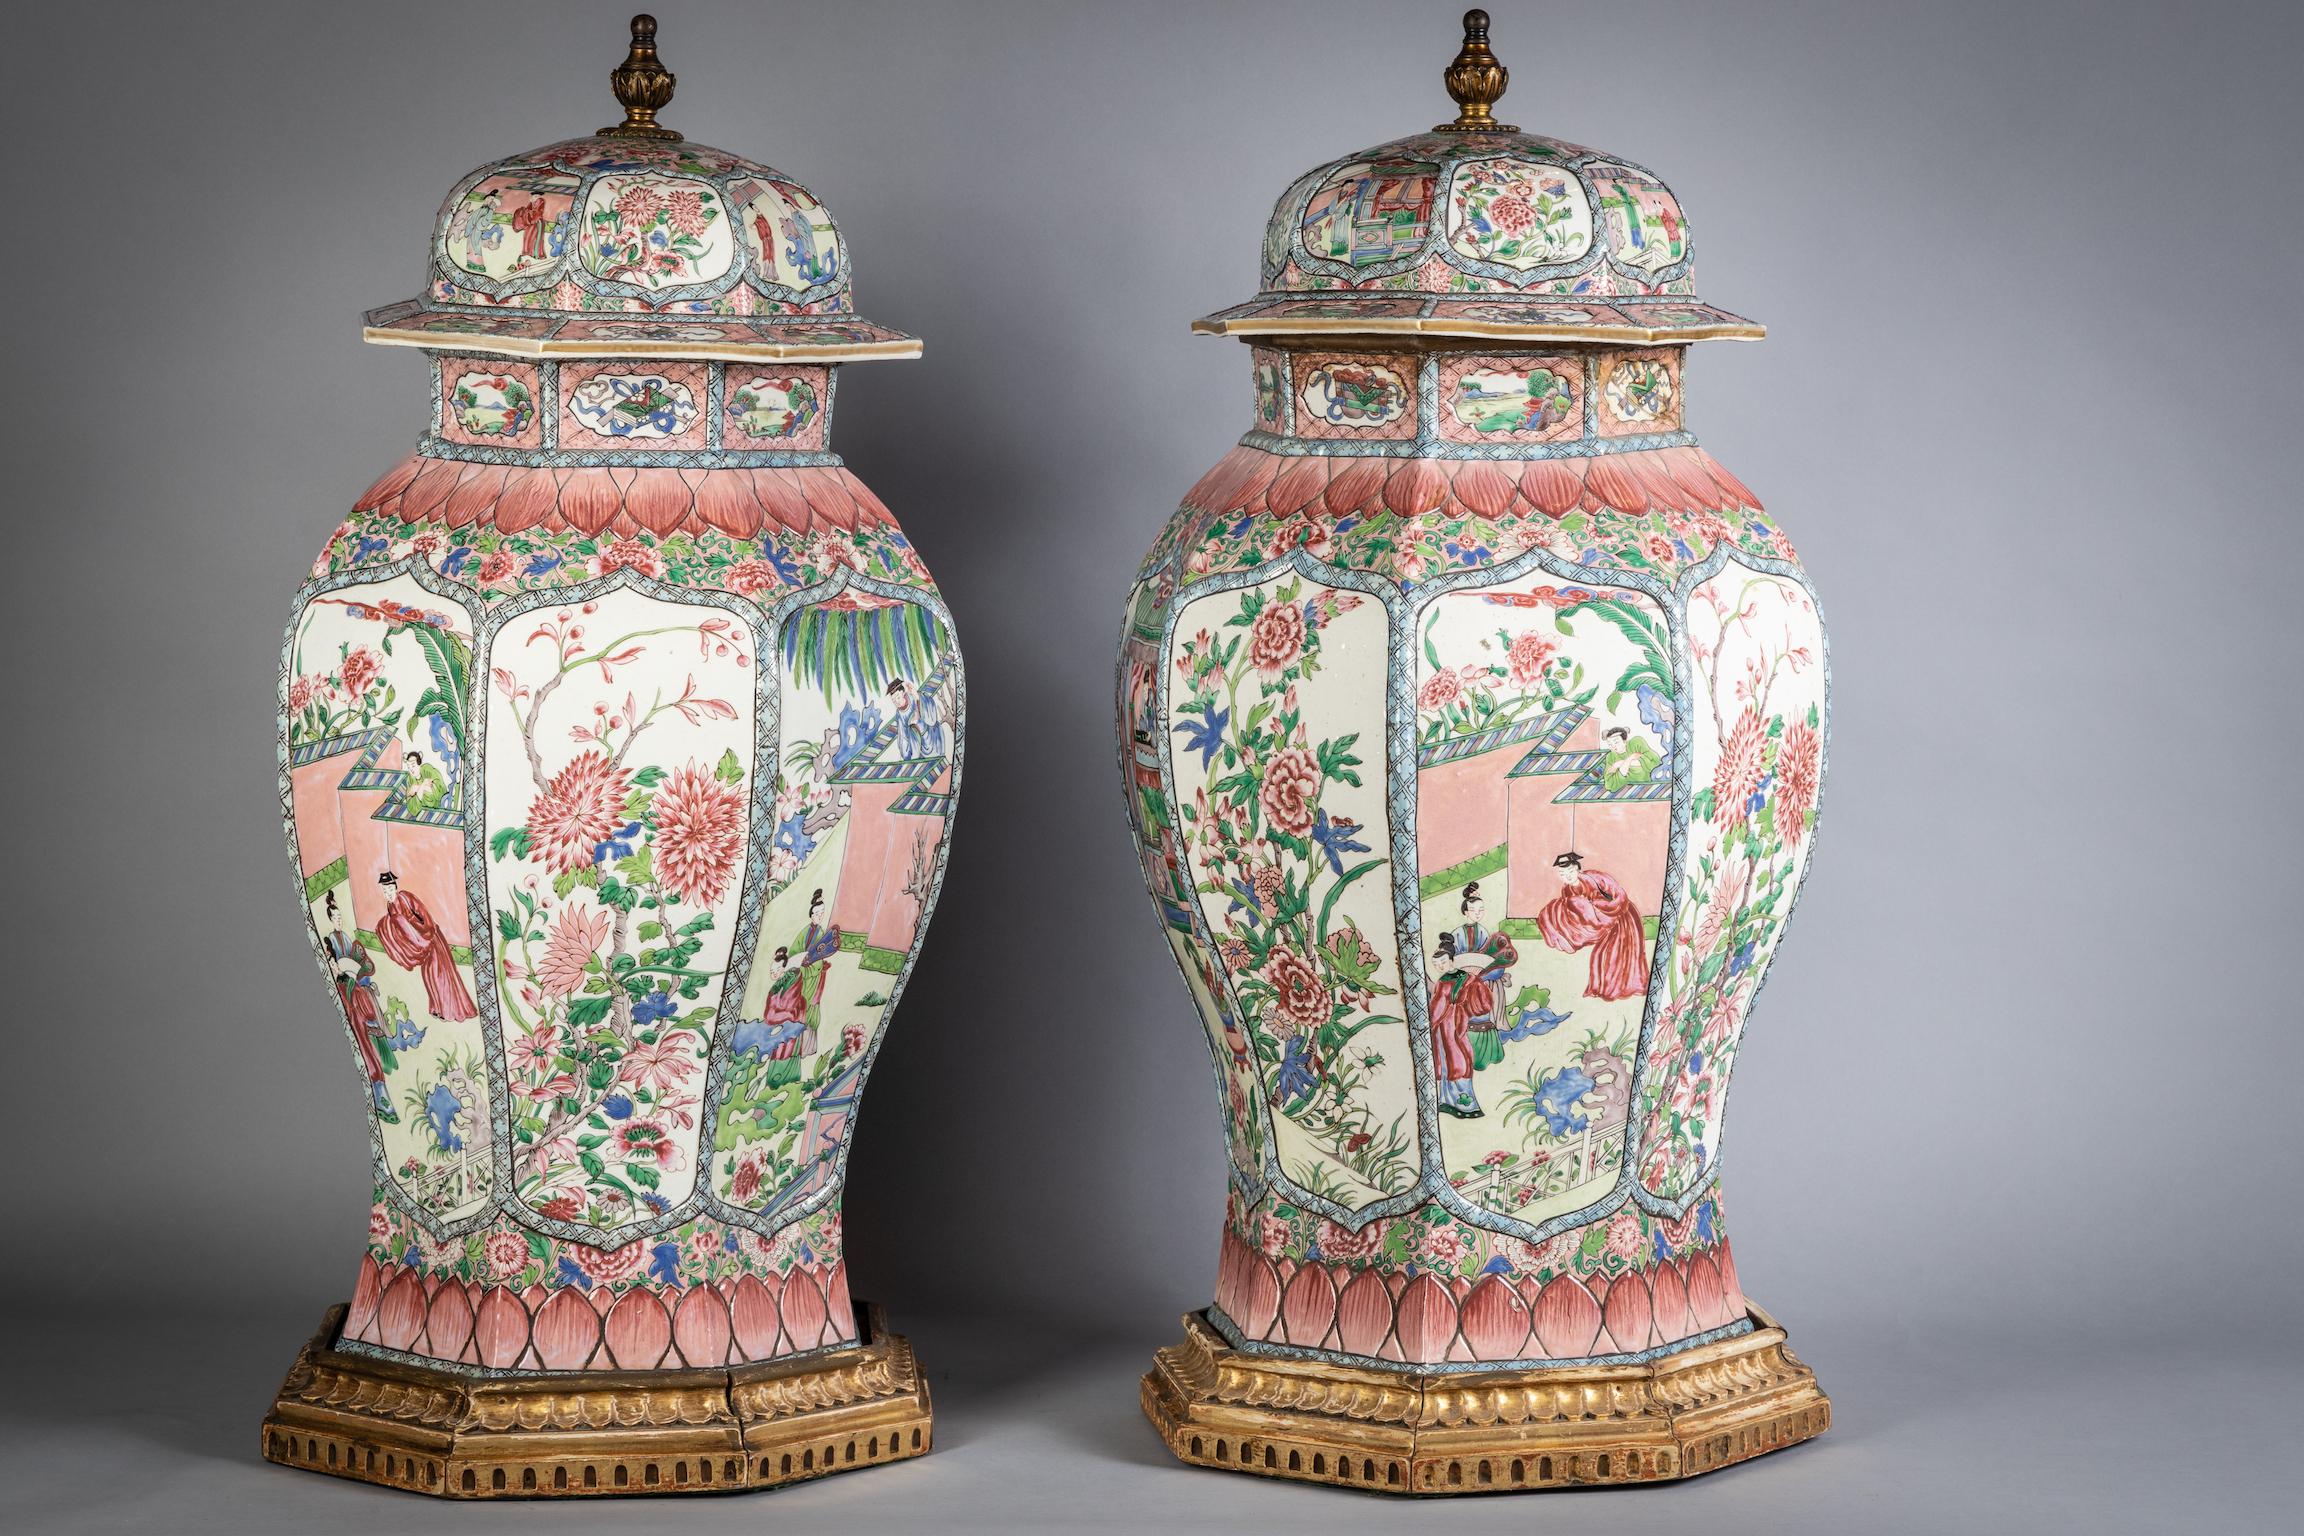 Pair of Massive French Porcelain Famille Rose Chinoiserie Covered Urns 3